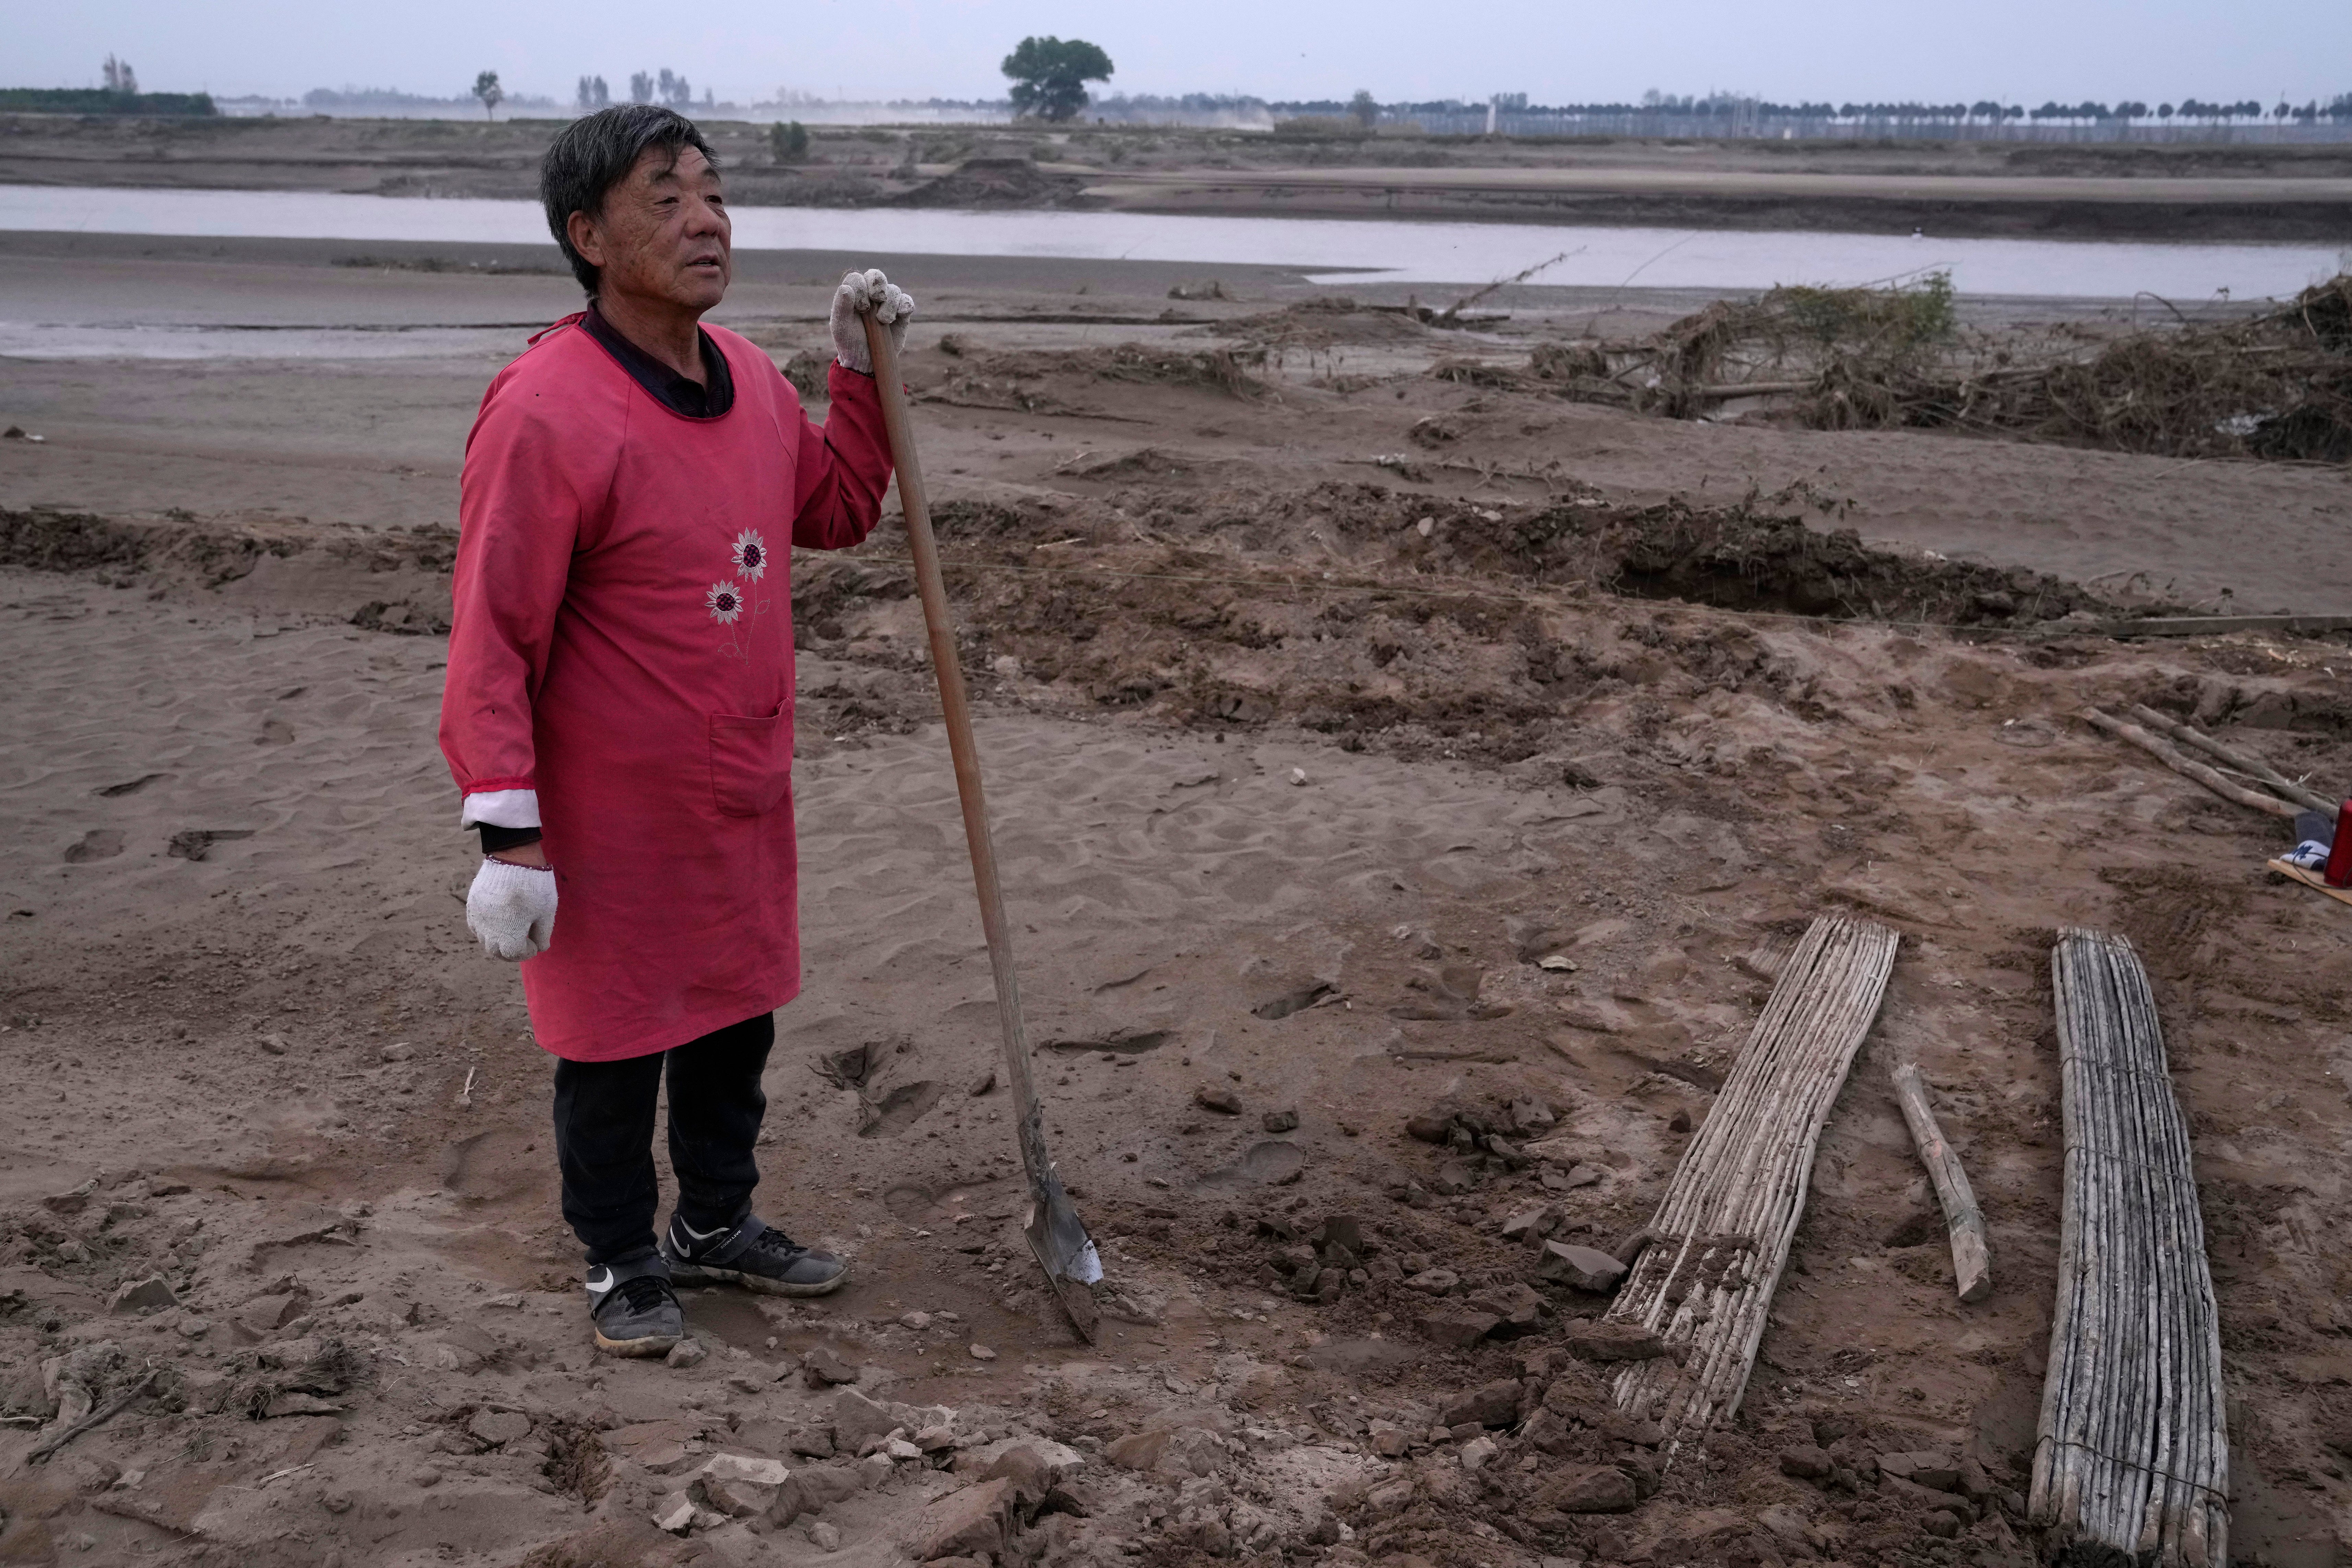 Wang Yue-tang stands near what used to be his peanut farm before torrential rains submerged the lowland leaving him with no summer harvest near Xubao village in central China’s Henan province in October 2021